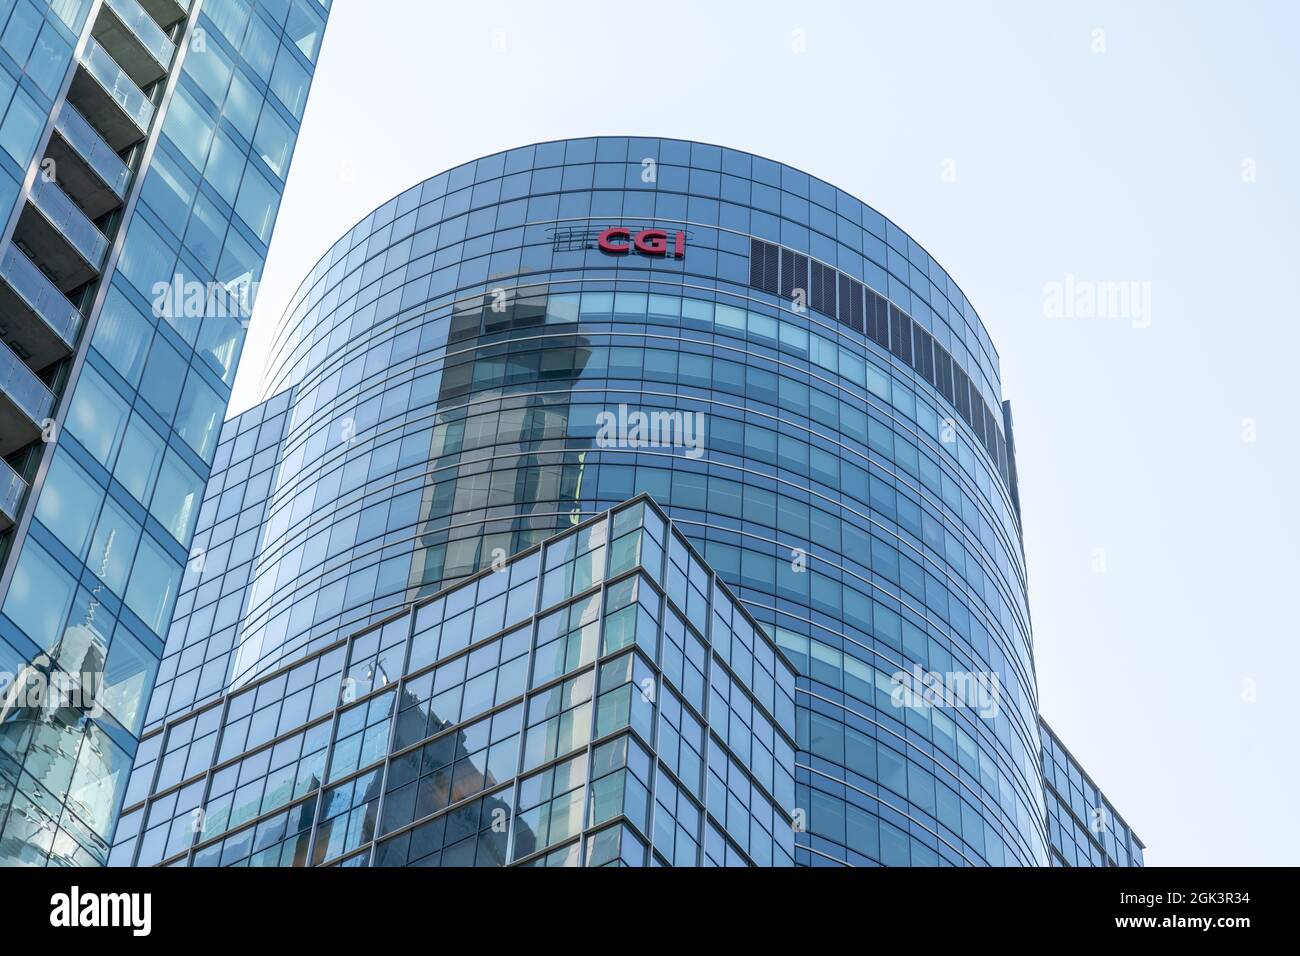 Cgi group inc hi-res stock photography and images - Alamy